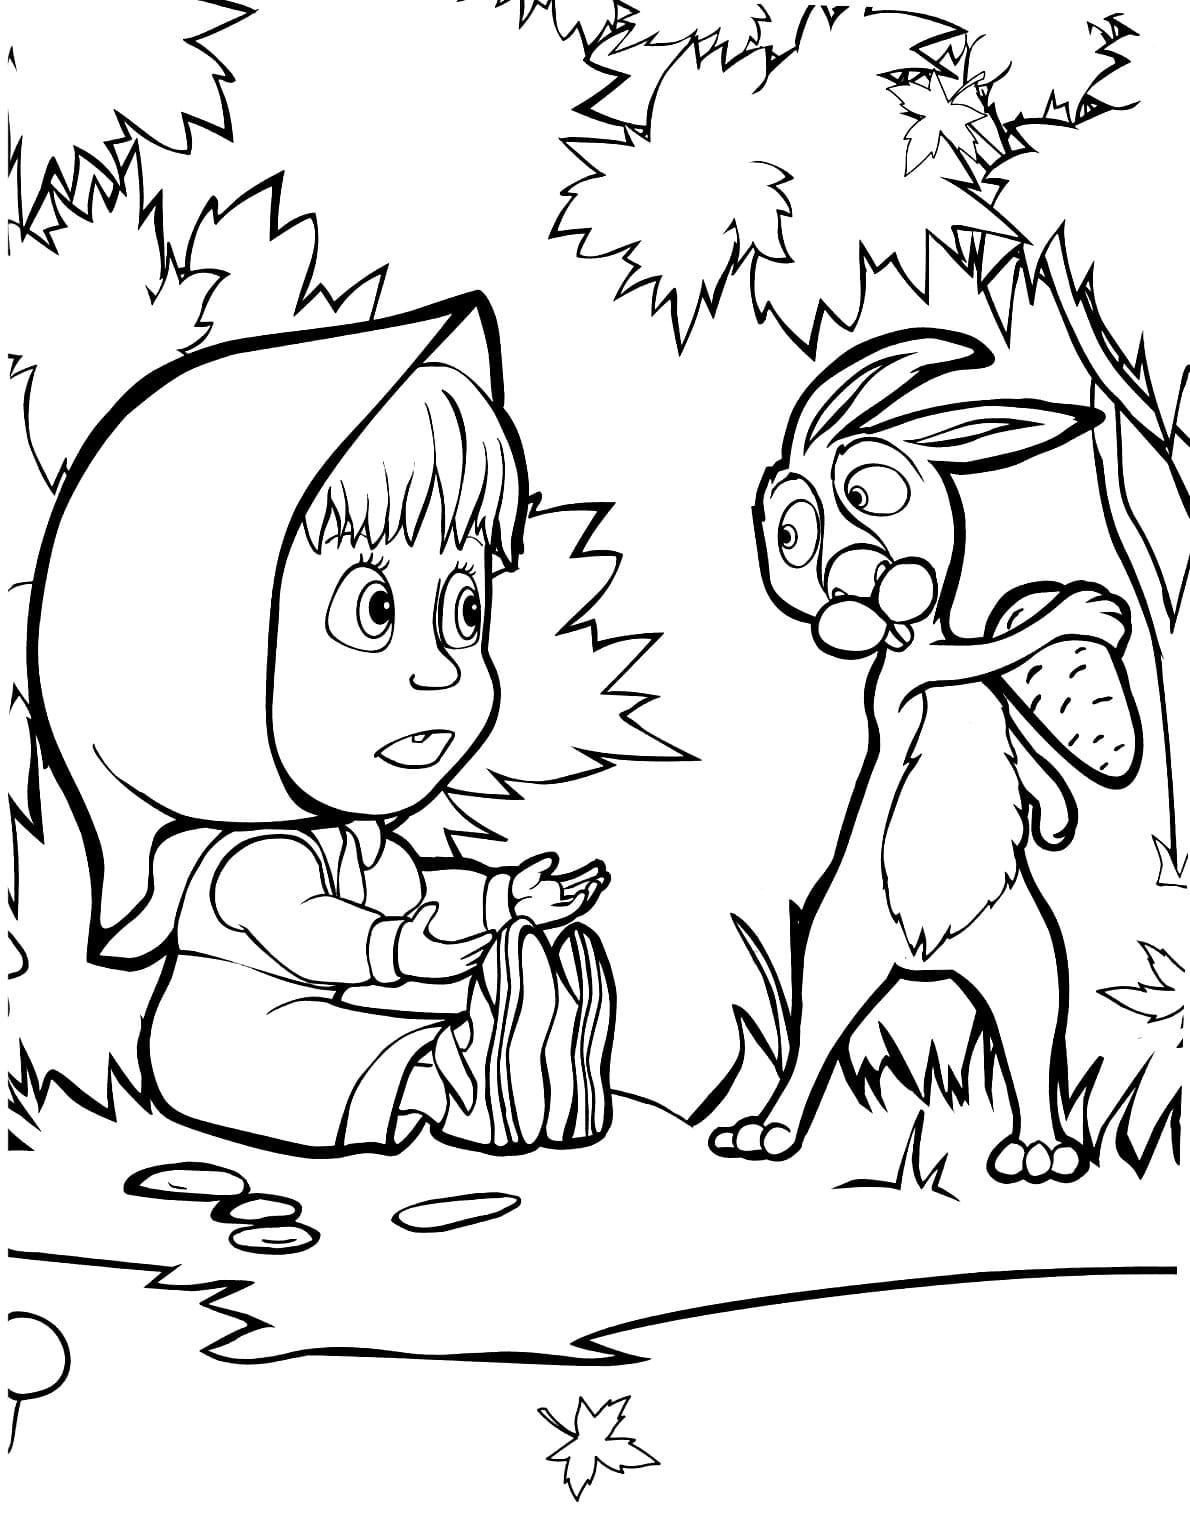 Masha and The Bear Coloring Pages. 80 Images Free Printable